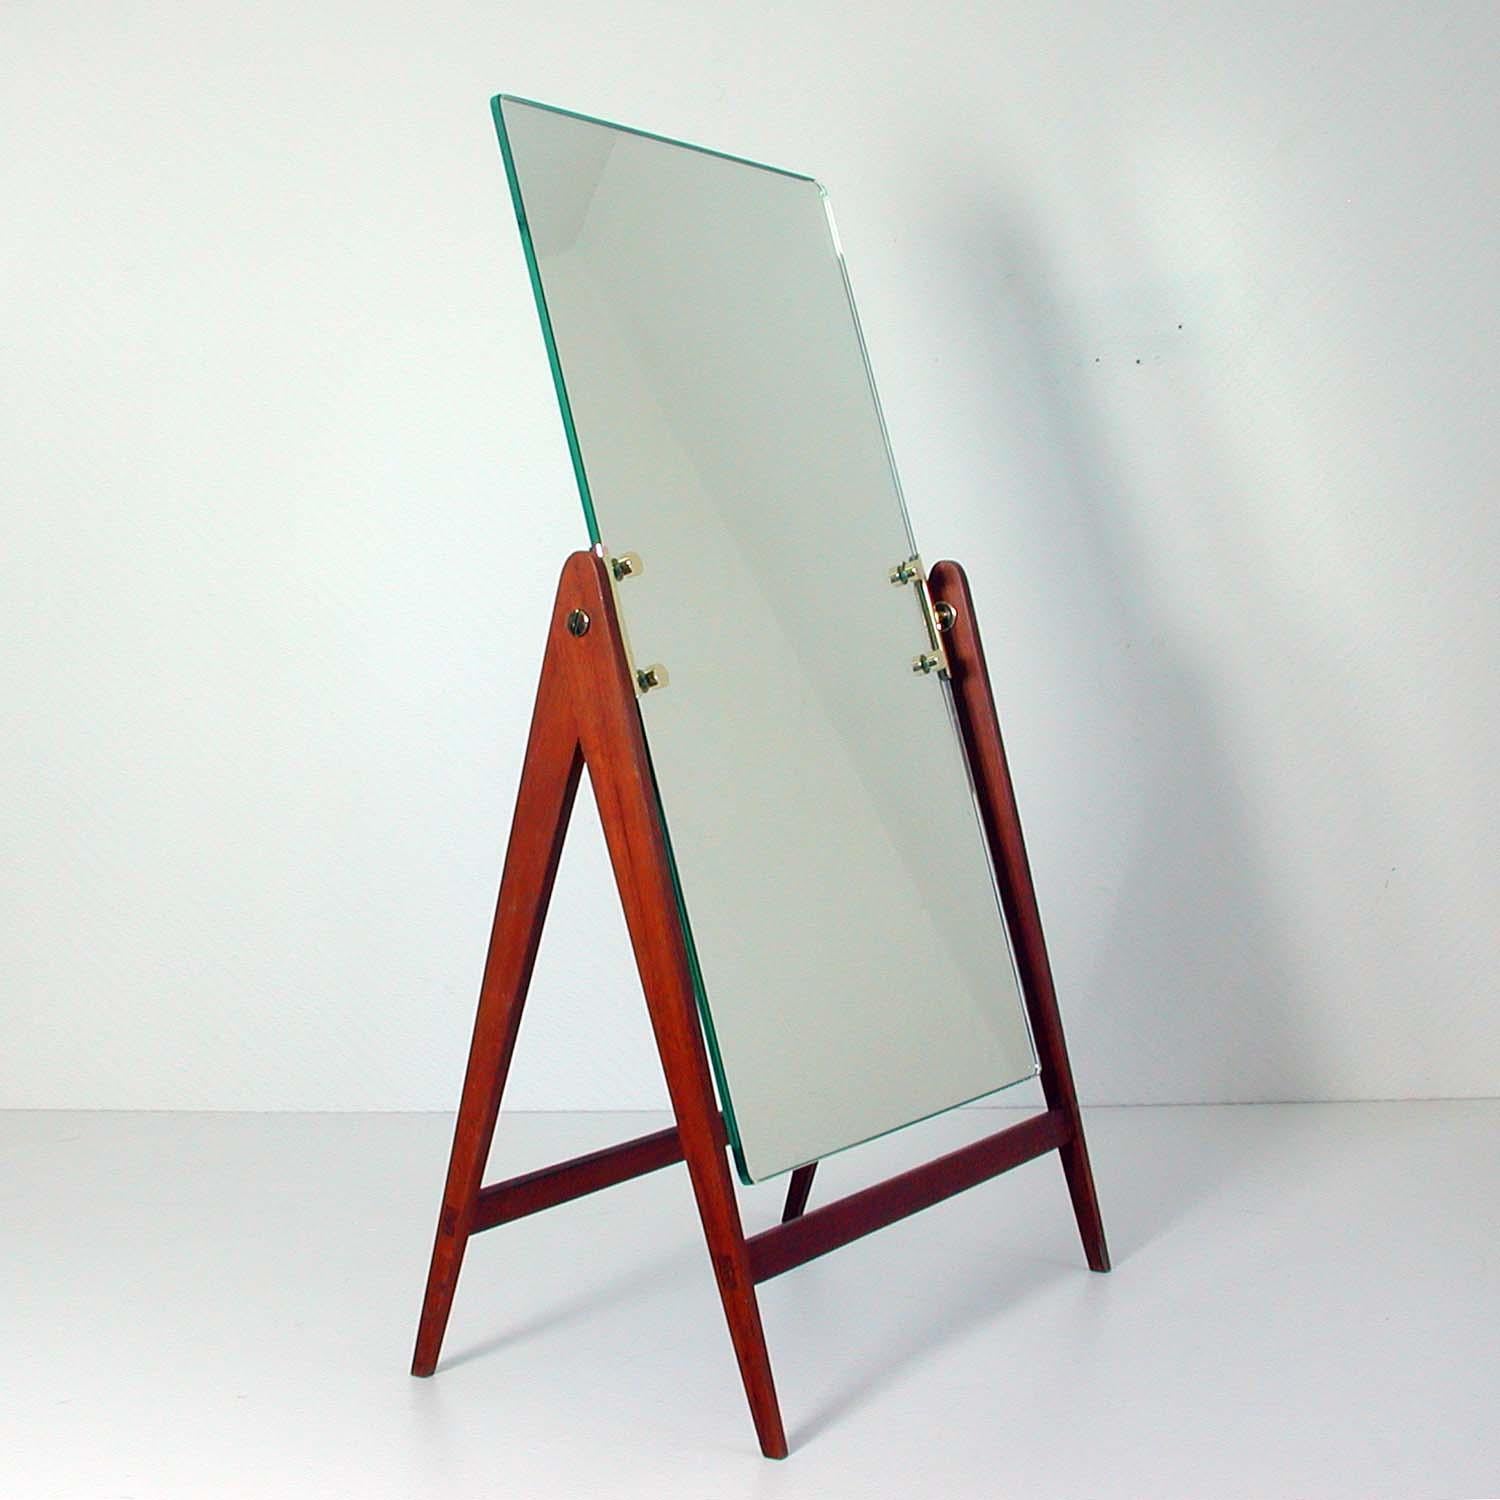 This large table mirror was designed by Hans-Agne Jakobsson and manufactured by Markaryd in Sweden in the 1960s. 
It has got a teak base and an adjustable mirror with brass details. It has also got it´s original tag.

Condition is excellent.